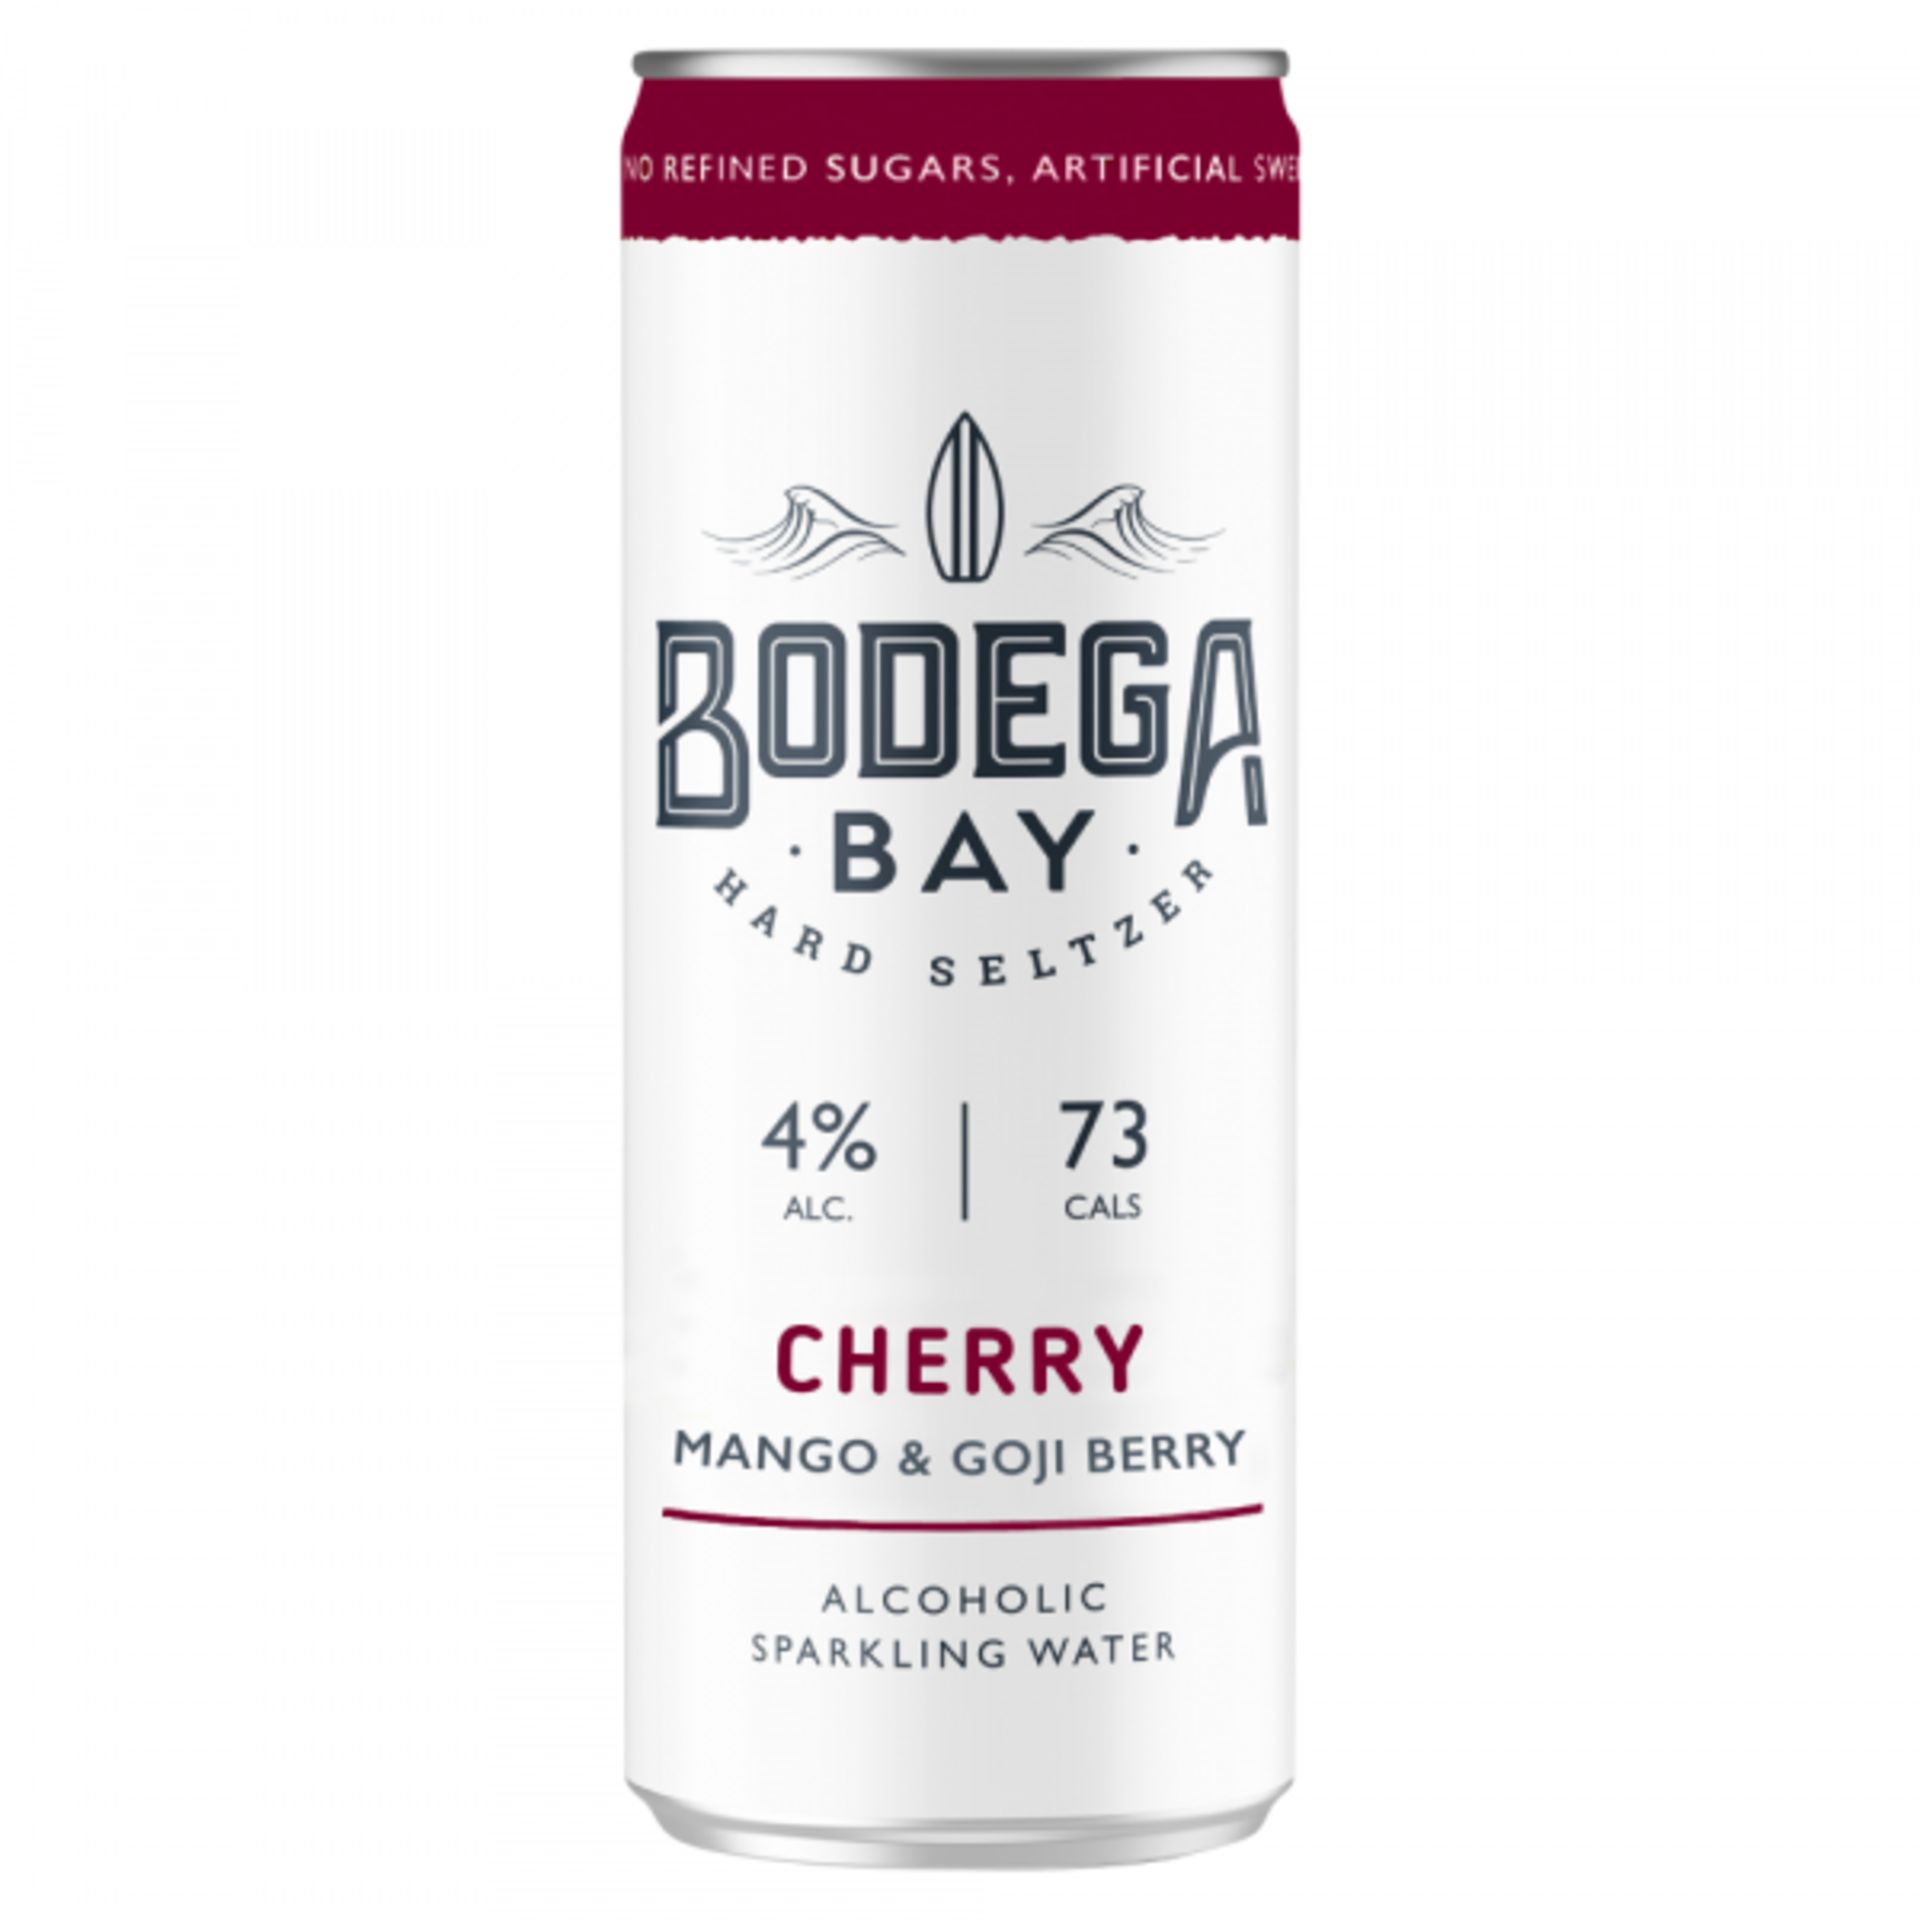 360 x Cans of Bodega Bay Hard Seltzer 250ml Alcoholic Sparkling Water Drinks - Various Flavours - Image 14 of 15